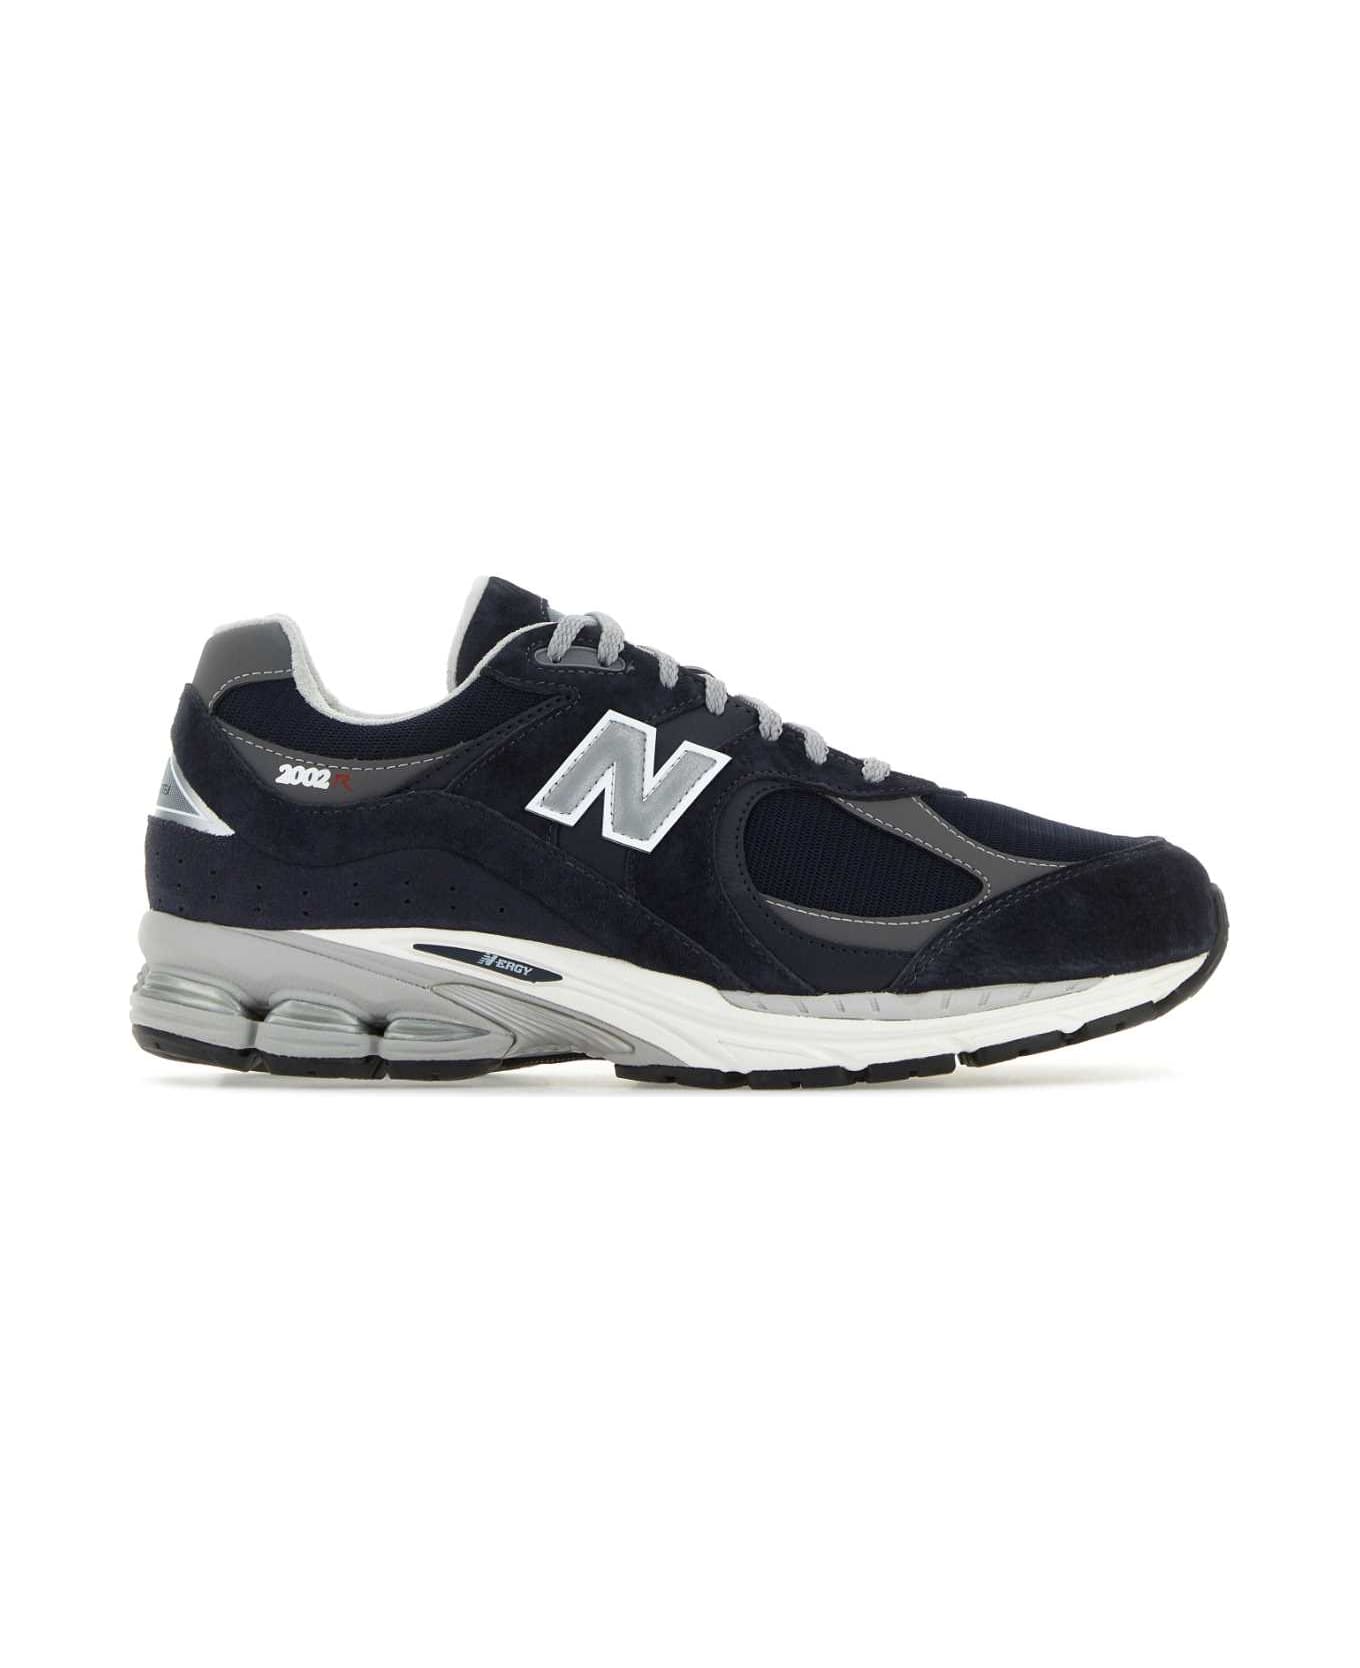 New Balance Multicolor Suede And Mesh 2002r Sneakers - ECLIPSE スニーカー